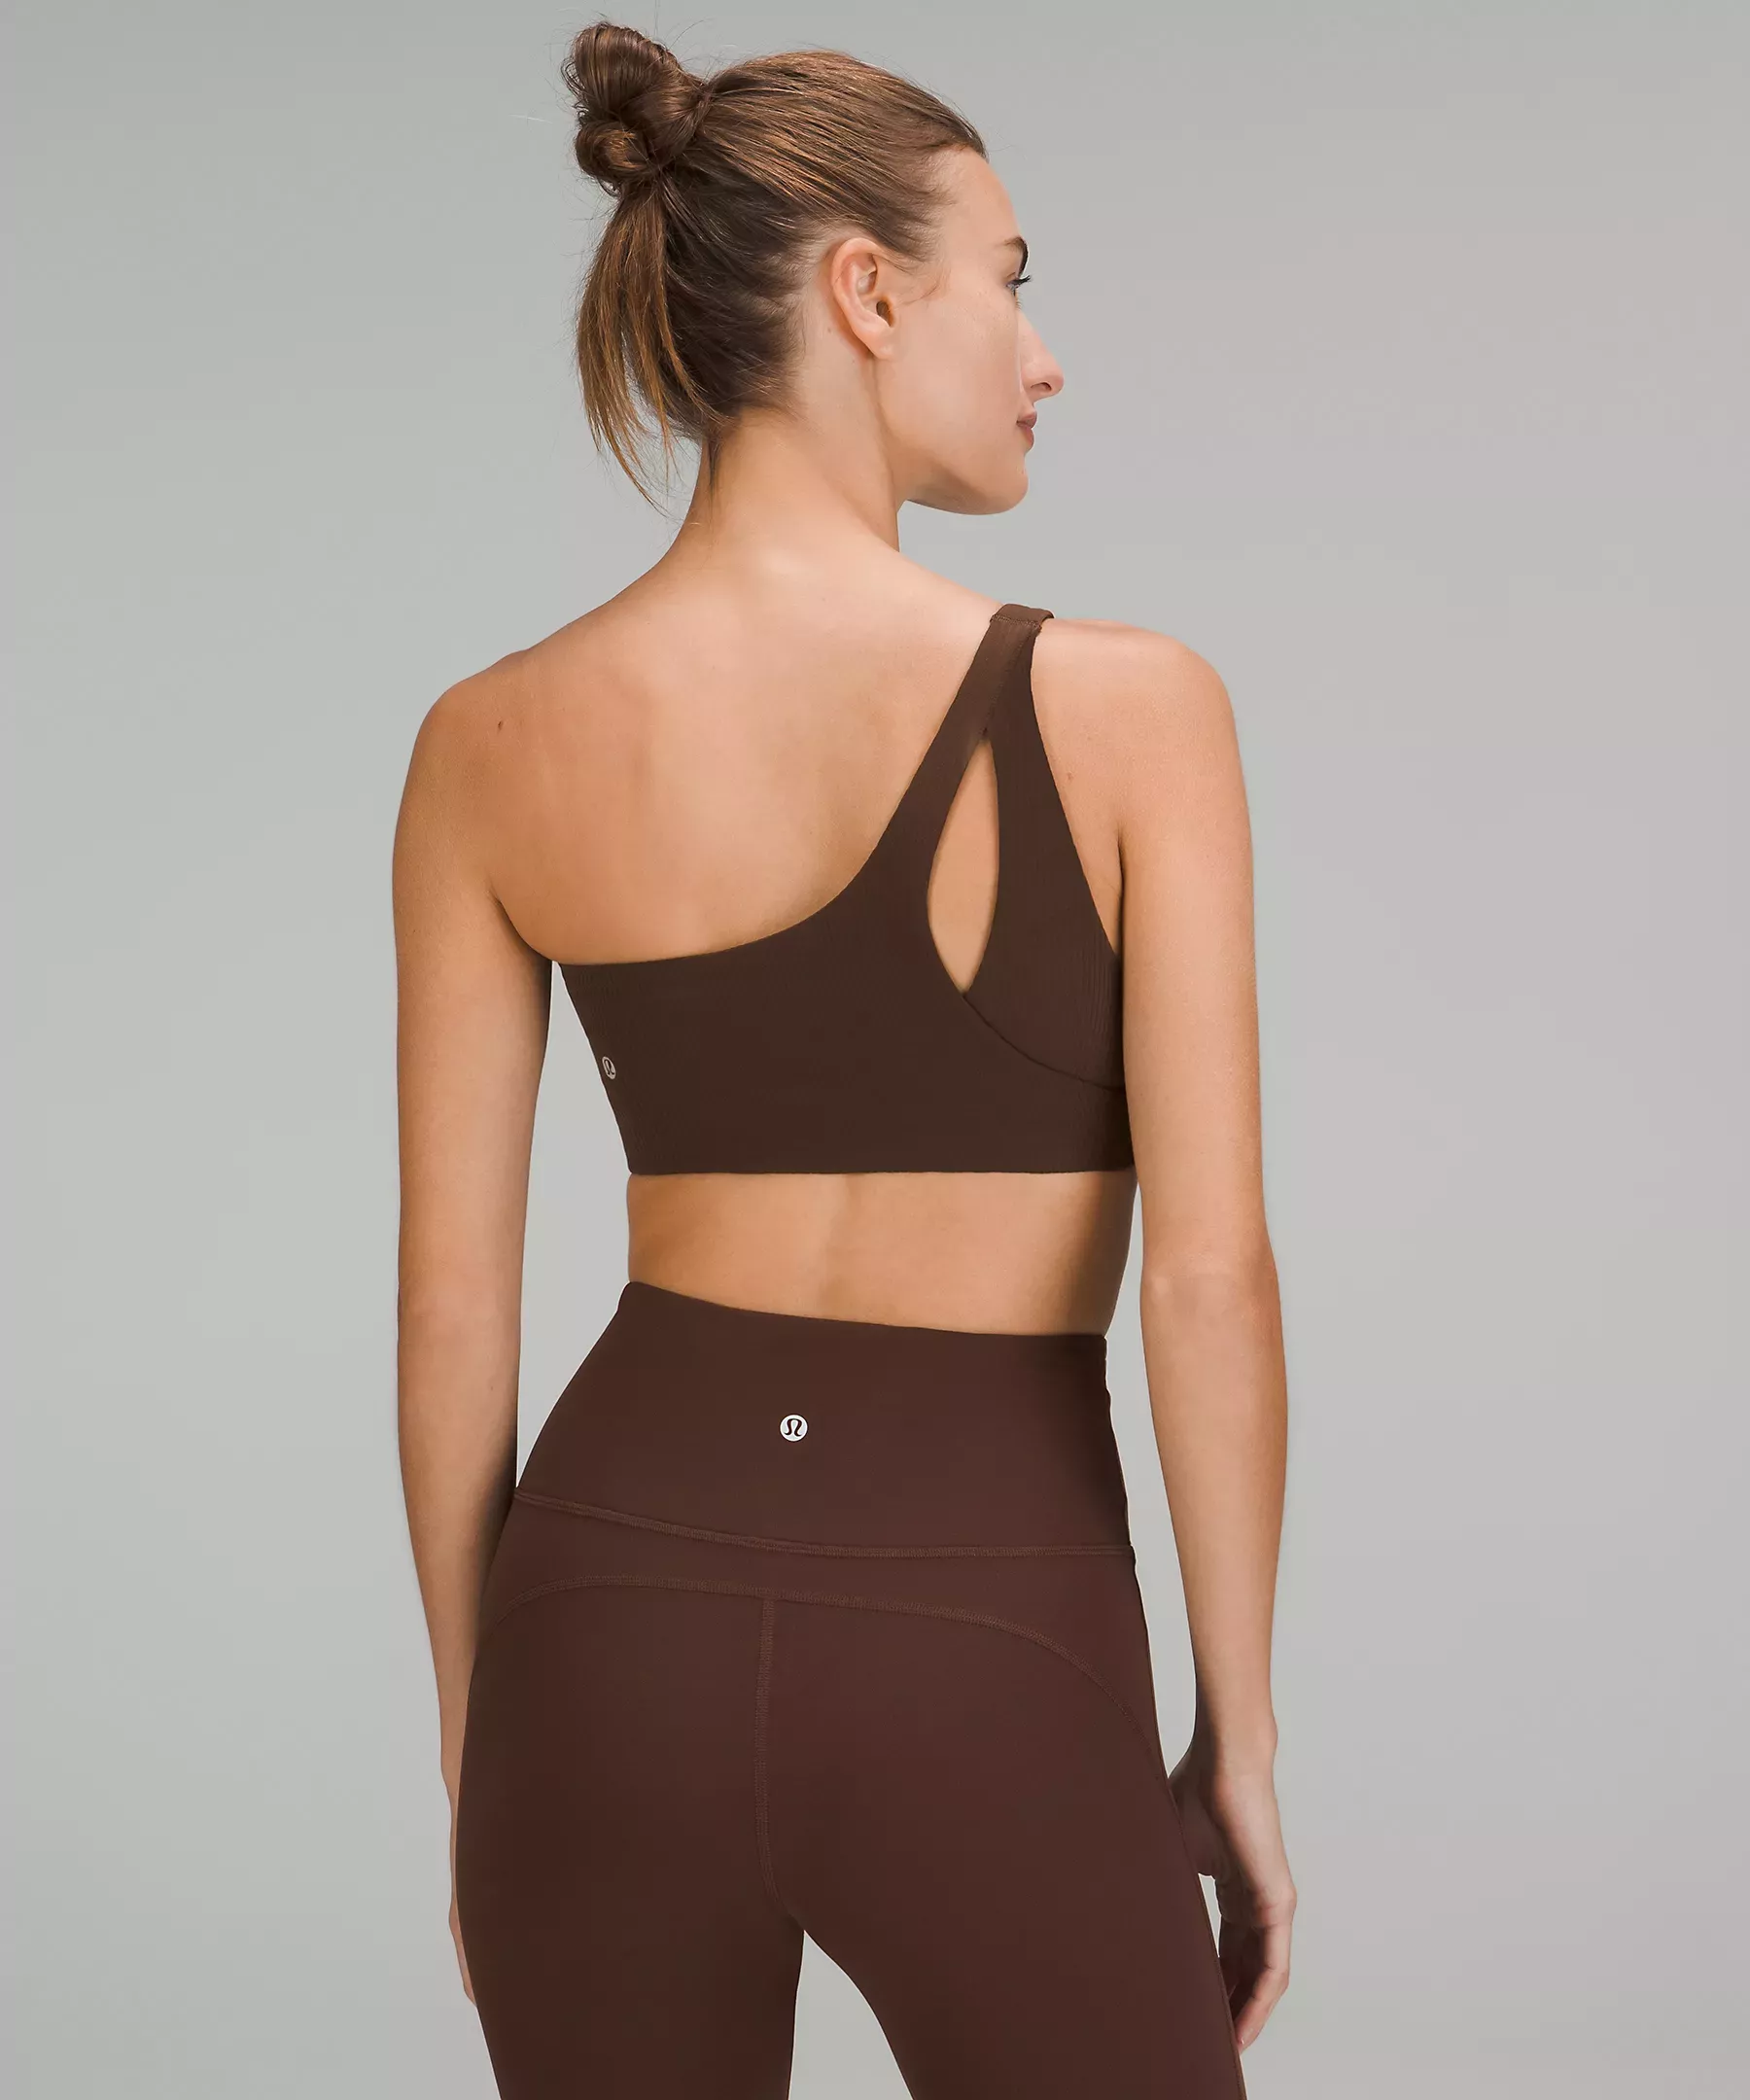 Khaki. Green. Olive. It's time for chic activewear. #lululemon